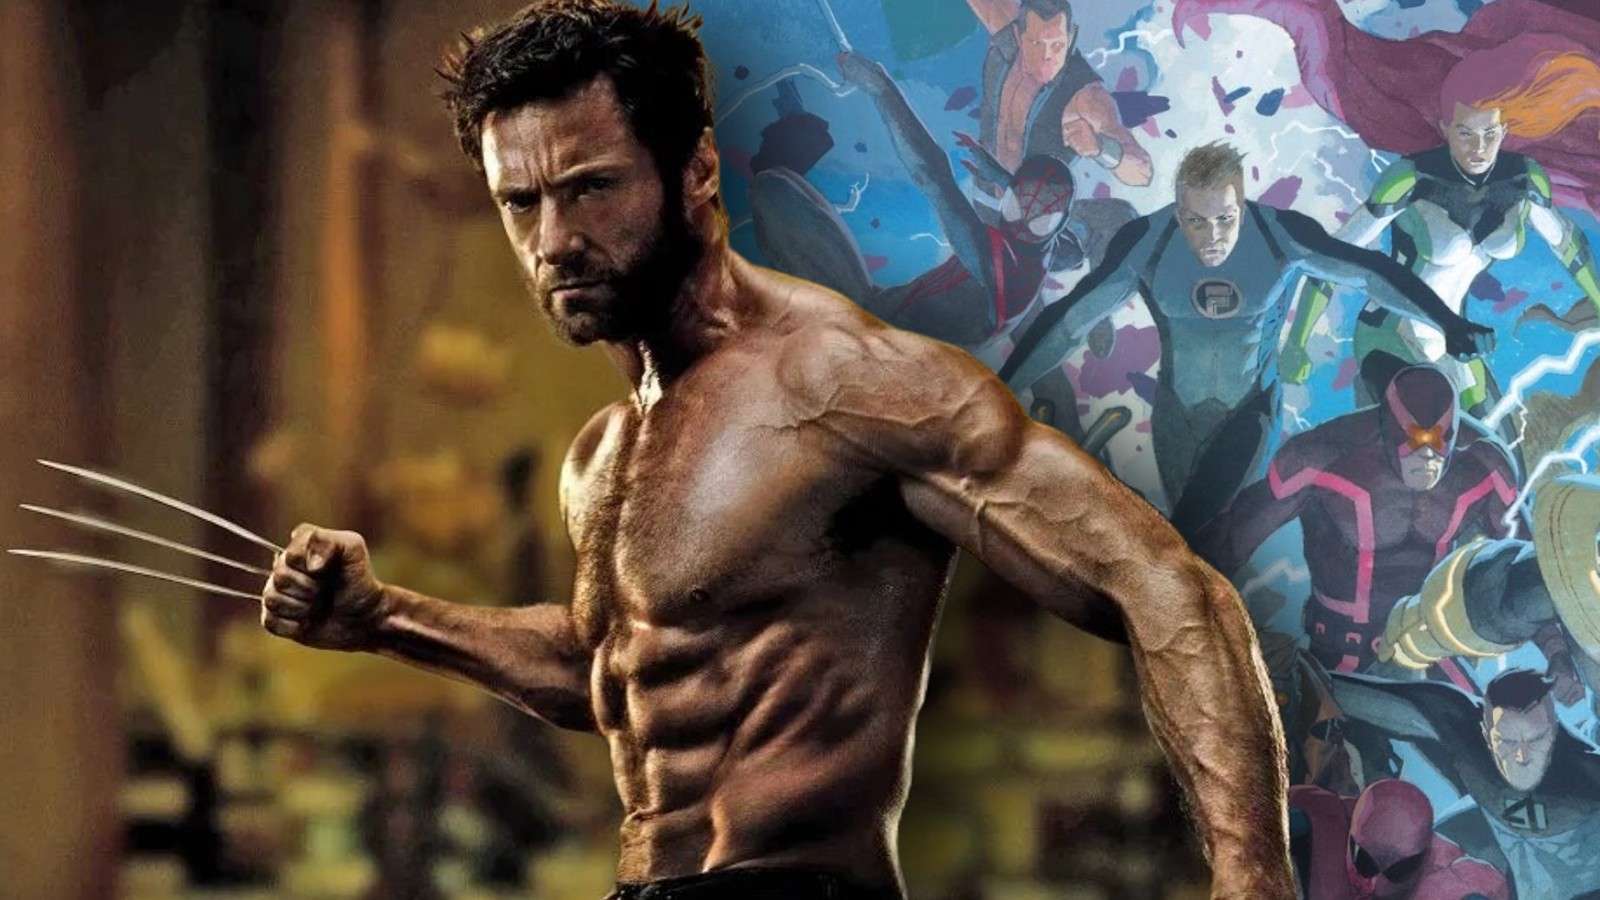 Hugh Jackman as Wolverine and a comic cover for Secret Wars